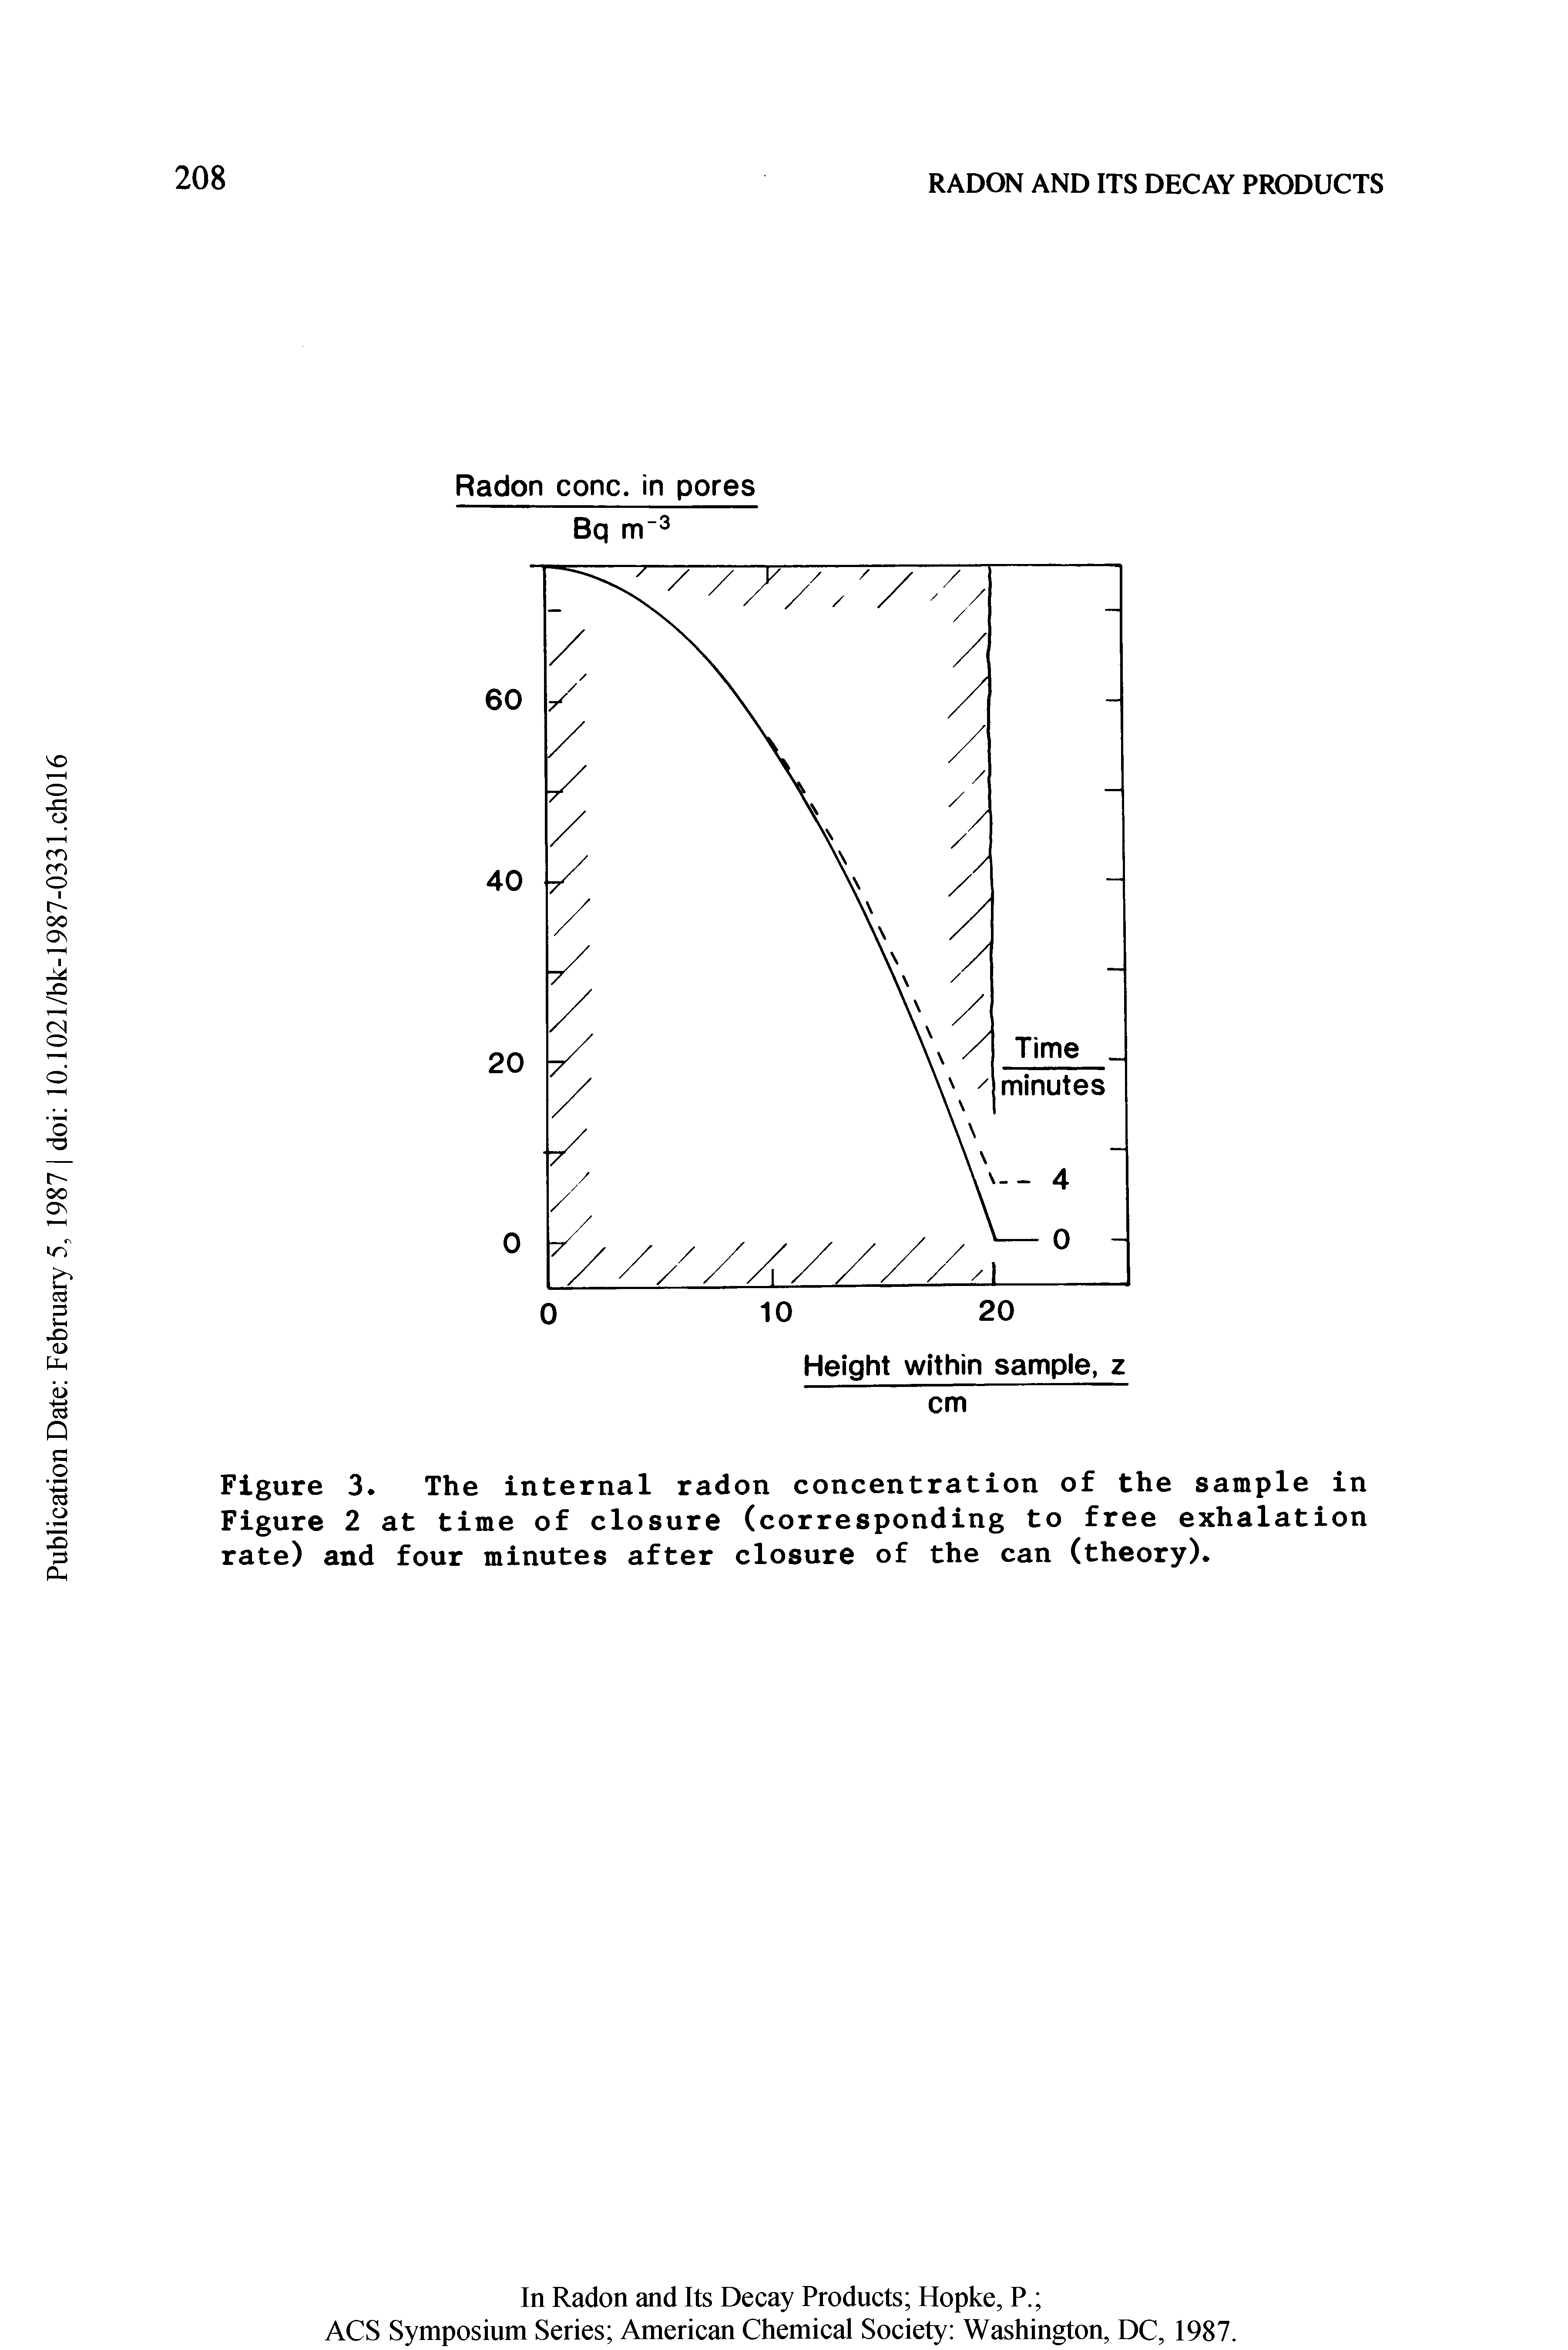 Figure 3 The internal radon concentration of the sample in Figure 2 at time of closure (corresponding to free exhalation rate) and four minutes after closure of the can (theory).